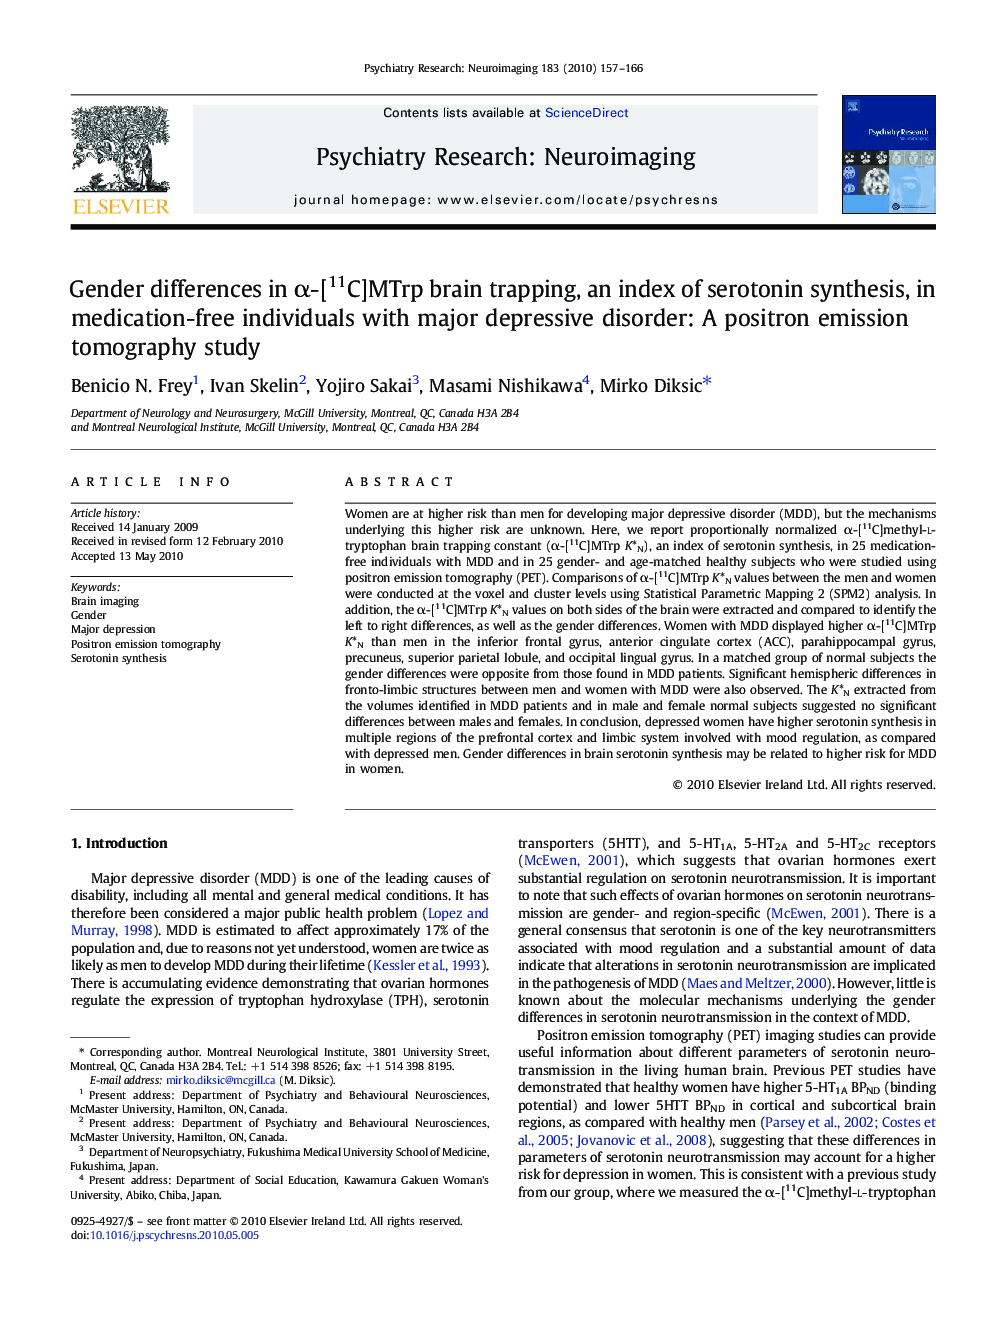 Gender differences in α-[11C]MTrp brain trapping, an index of serotonin synthesis, in medication-free individuals with major depressive disorder: A positron emission tomography study